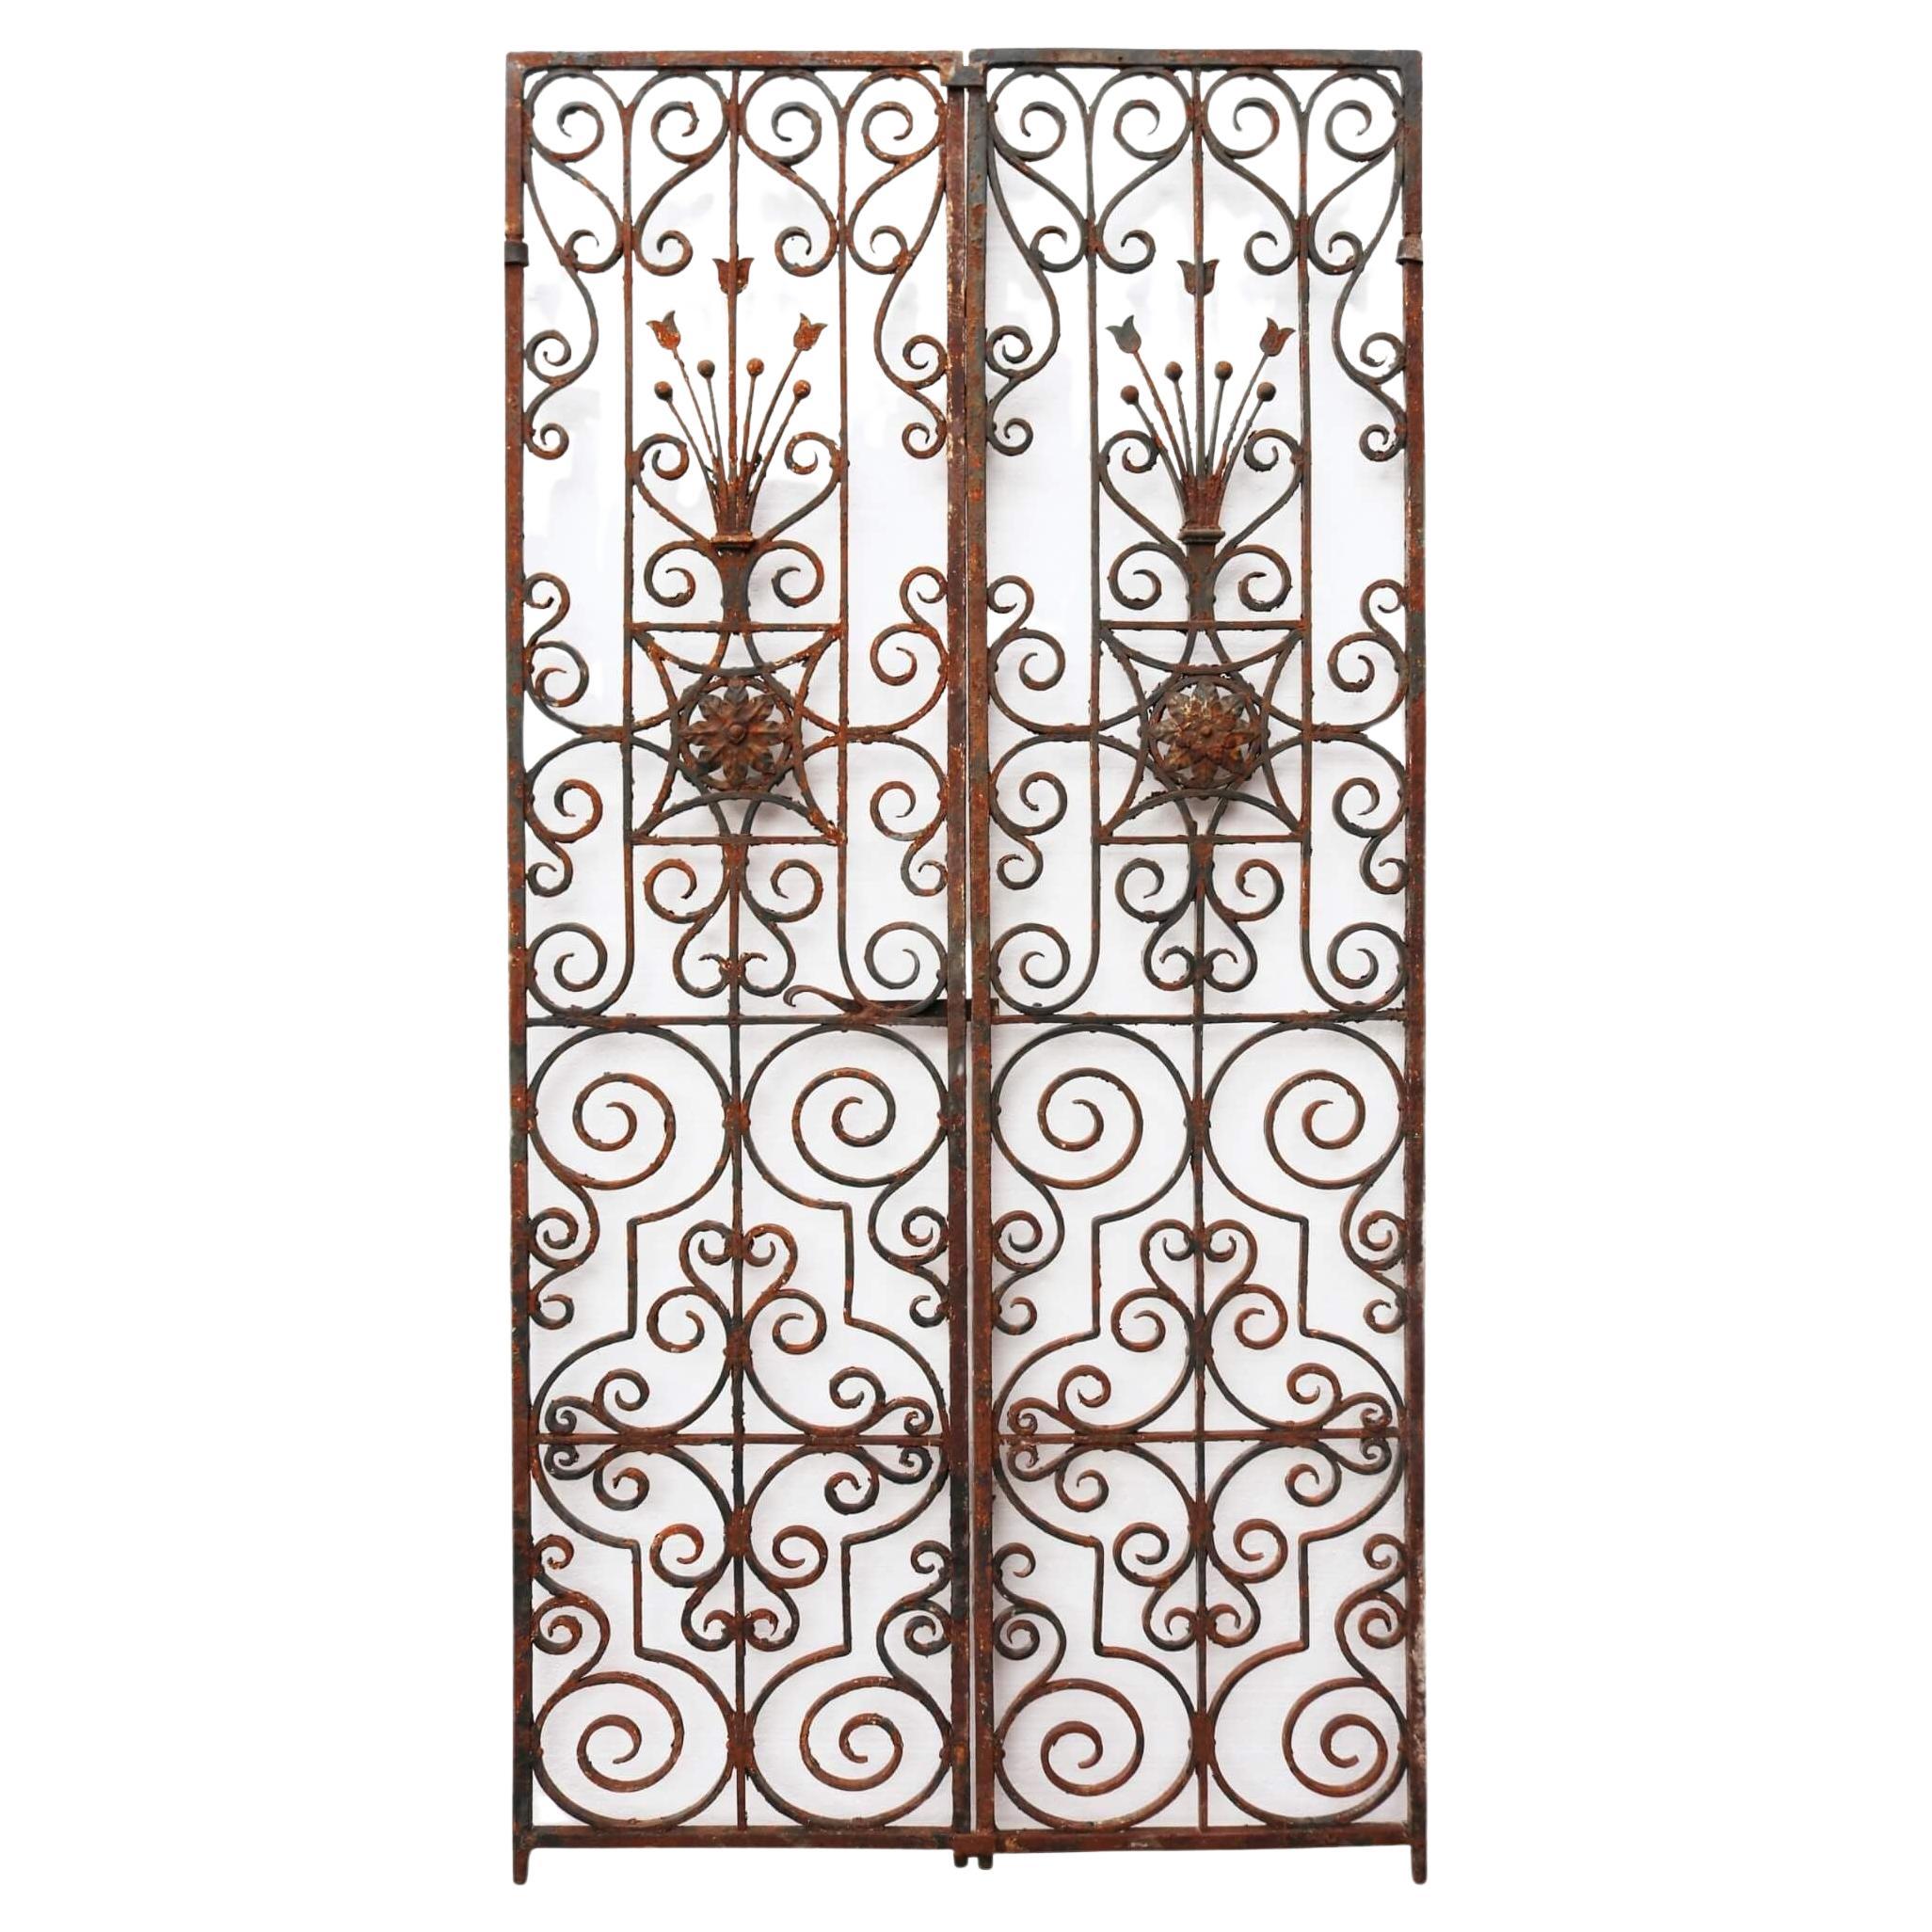 Set of Tall and Ornate Victorian Wrought Iron Garden Gates